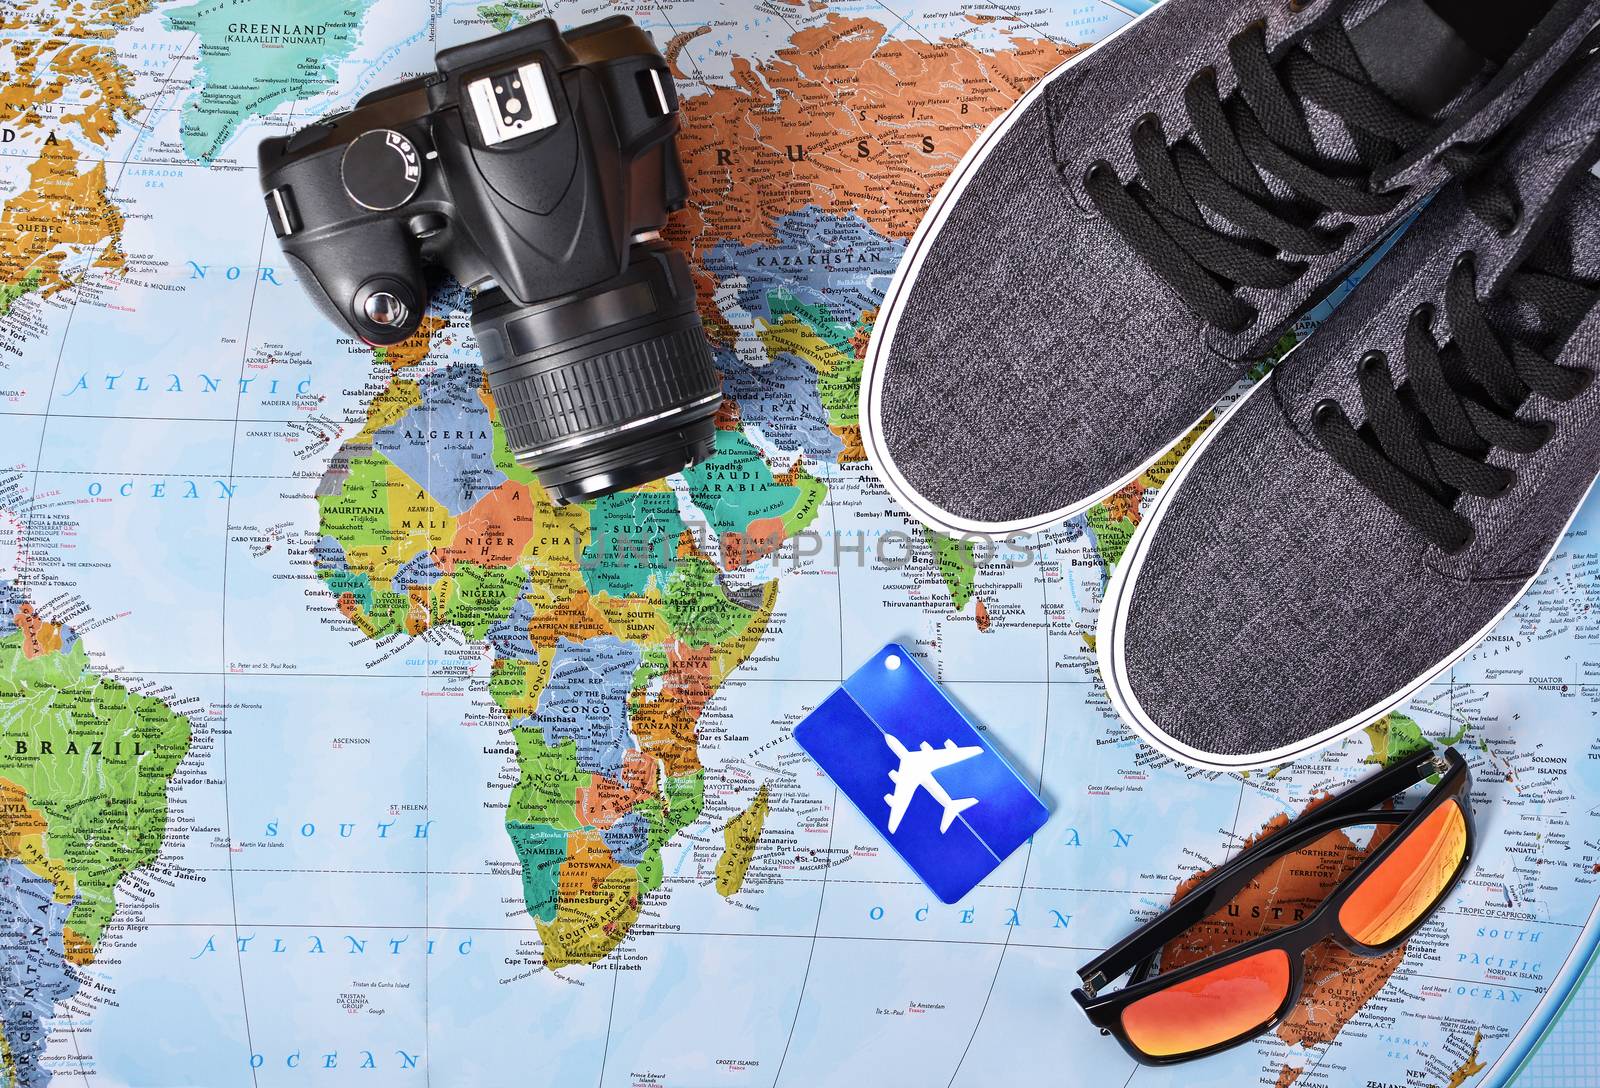 Top view of camera, airplane luggage tag, sunglasses and sneakers on a map of the world. These are my travel essentials for a trip around the world or just a weekend getaway.